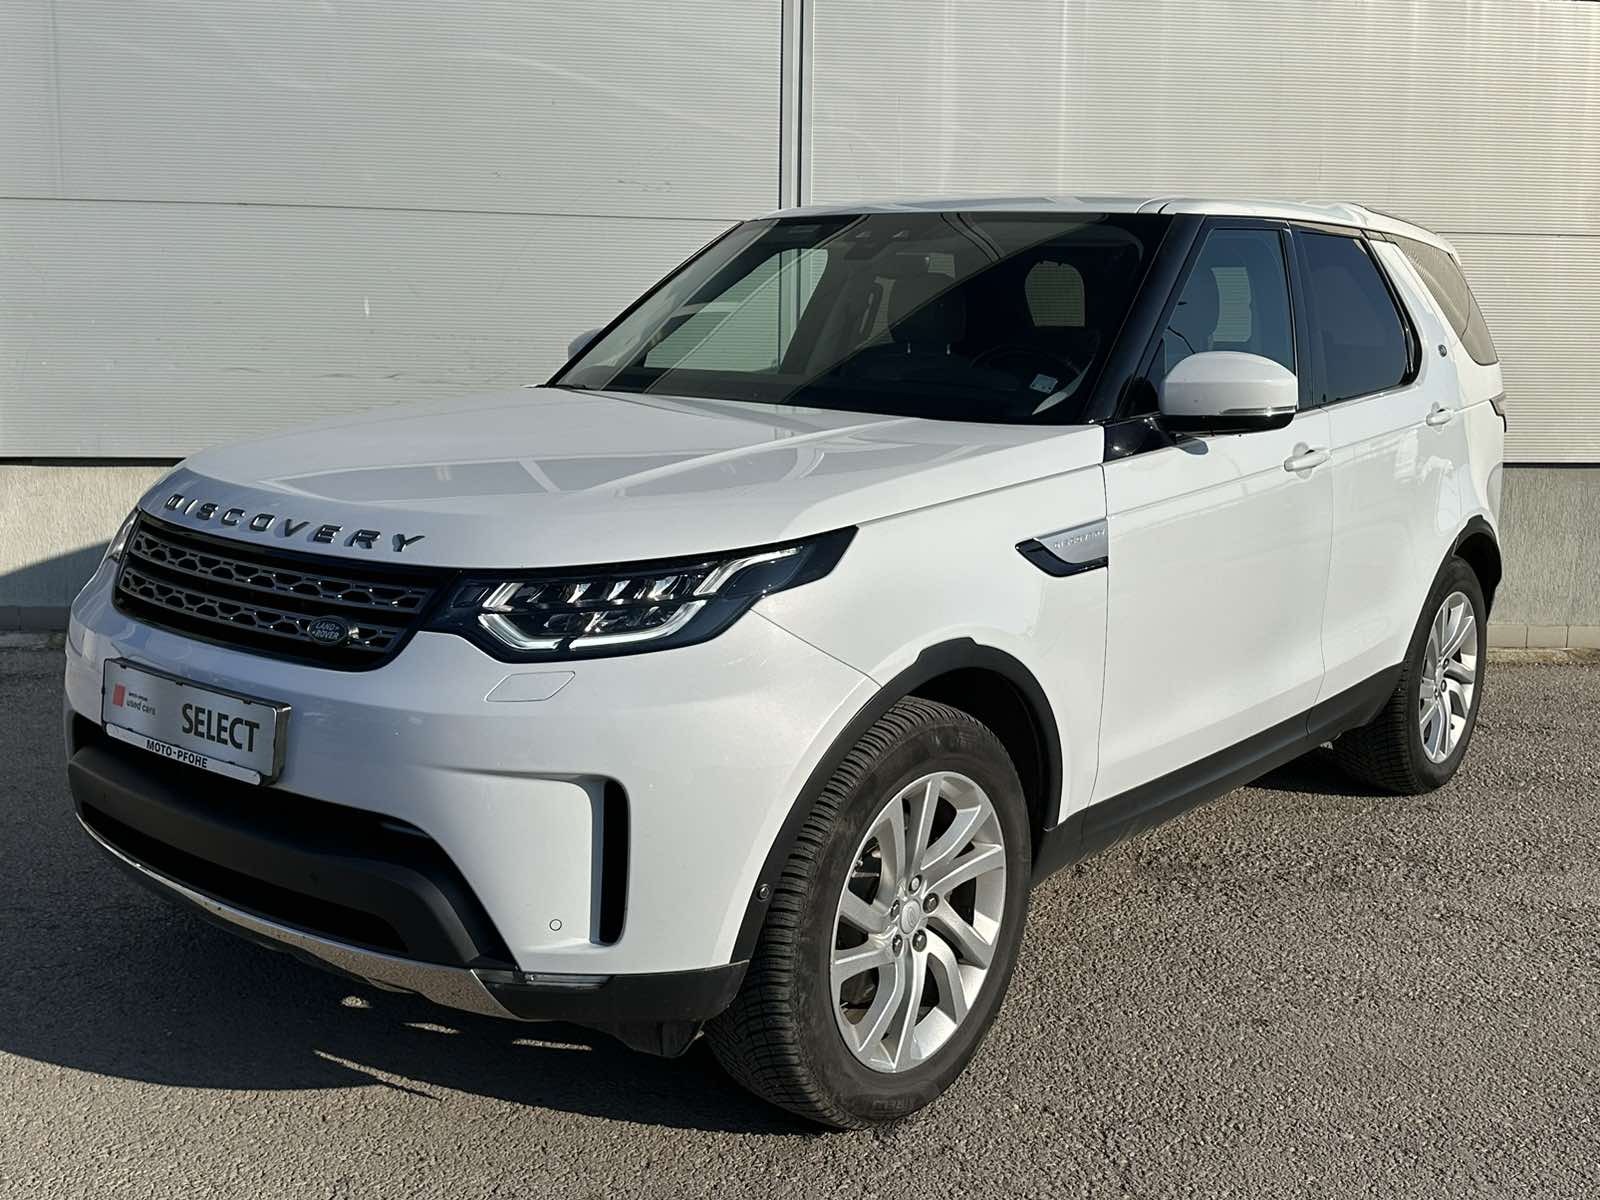 Land Rover Discovery 2.0 D - изображение 1